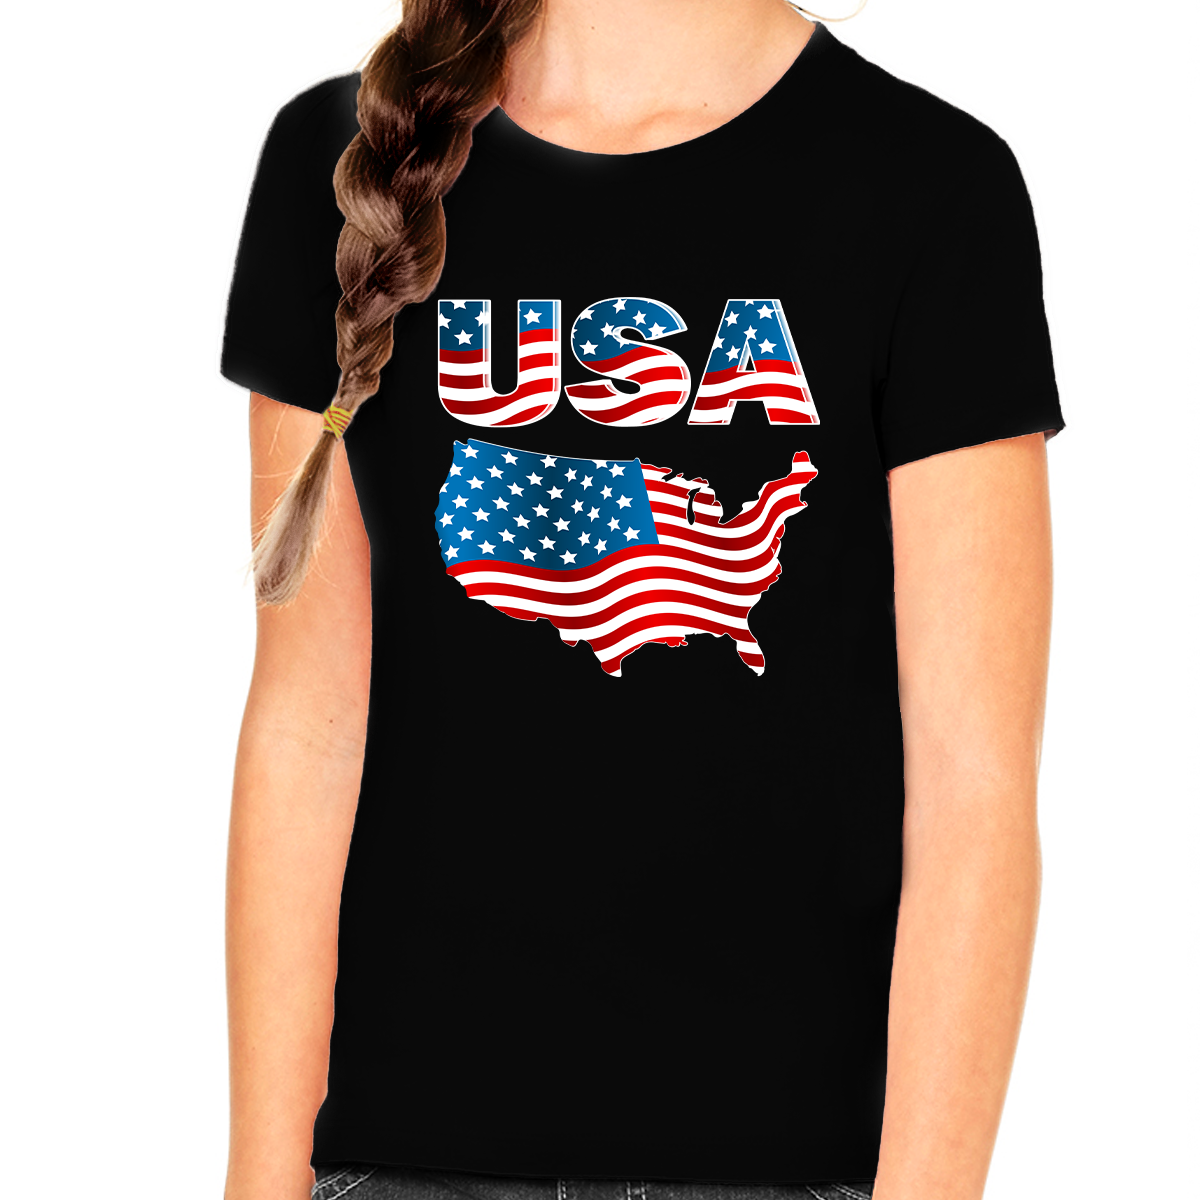 4th of July Shirts for Girls USA Shirt American Flag Shirt for Kids Patriotic Shirts for Girls - Fire Fit Designs